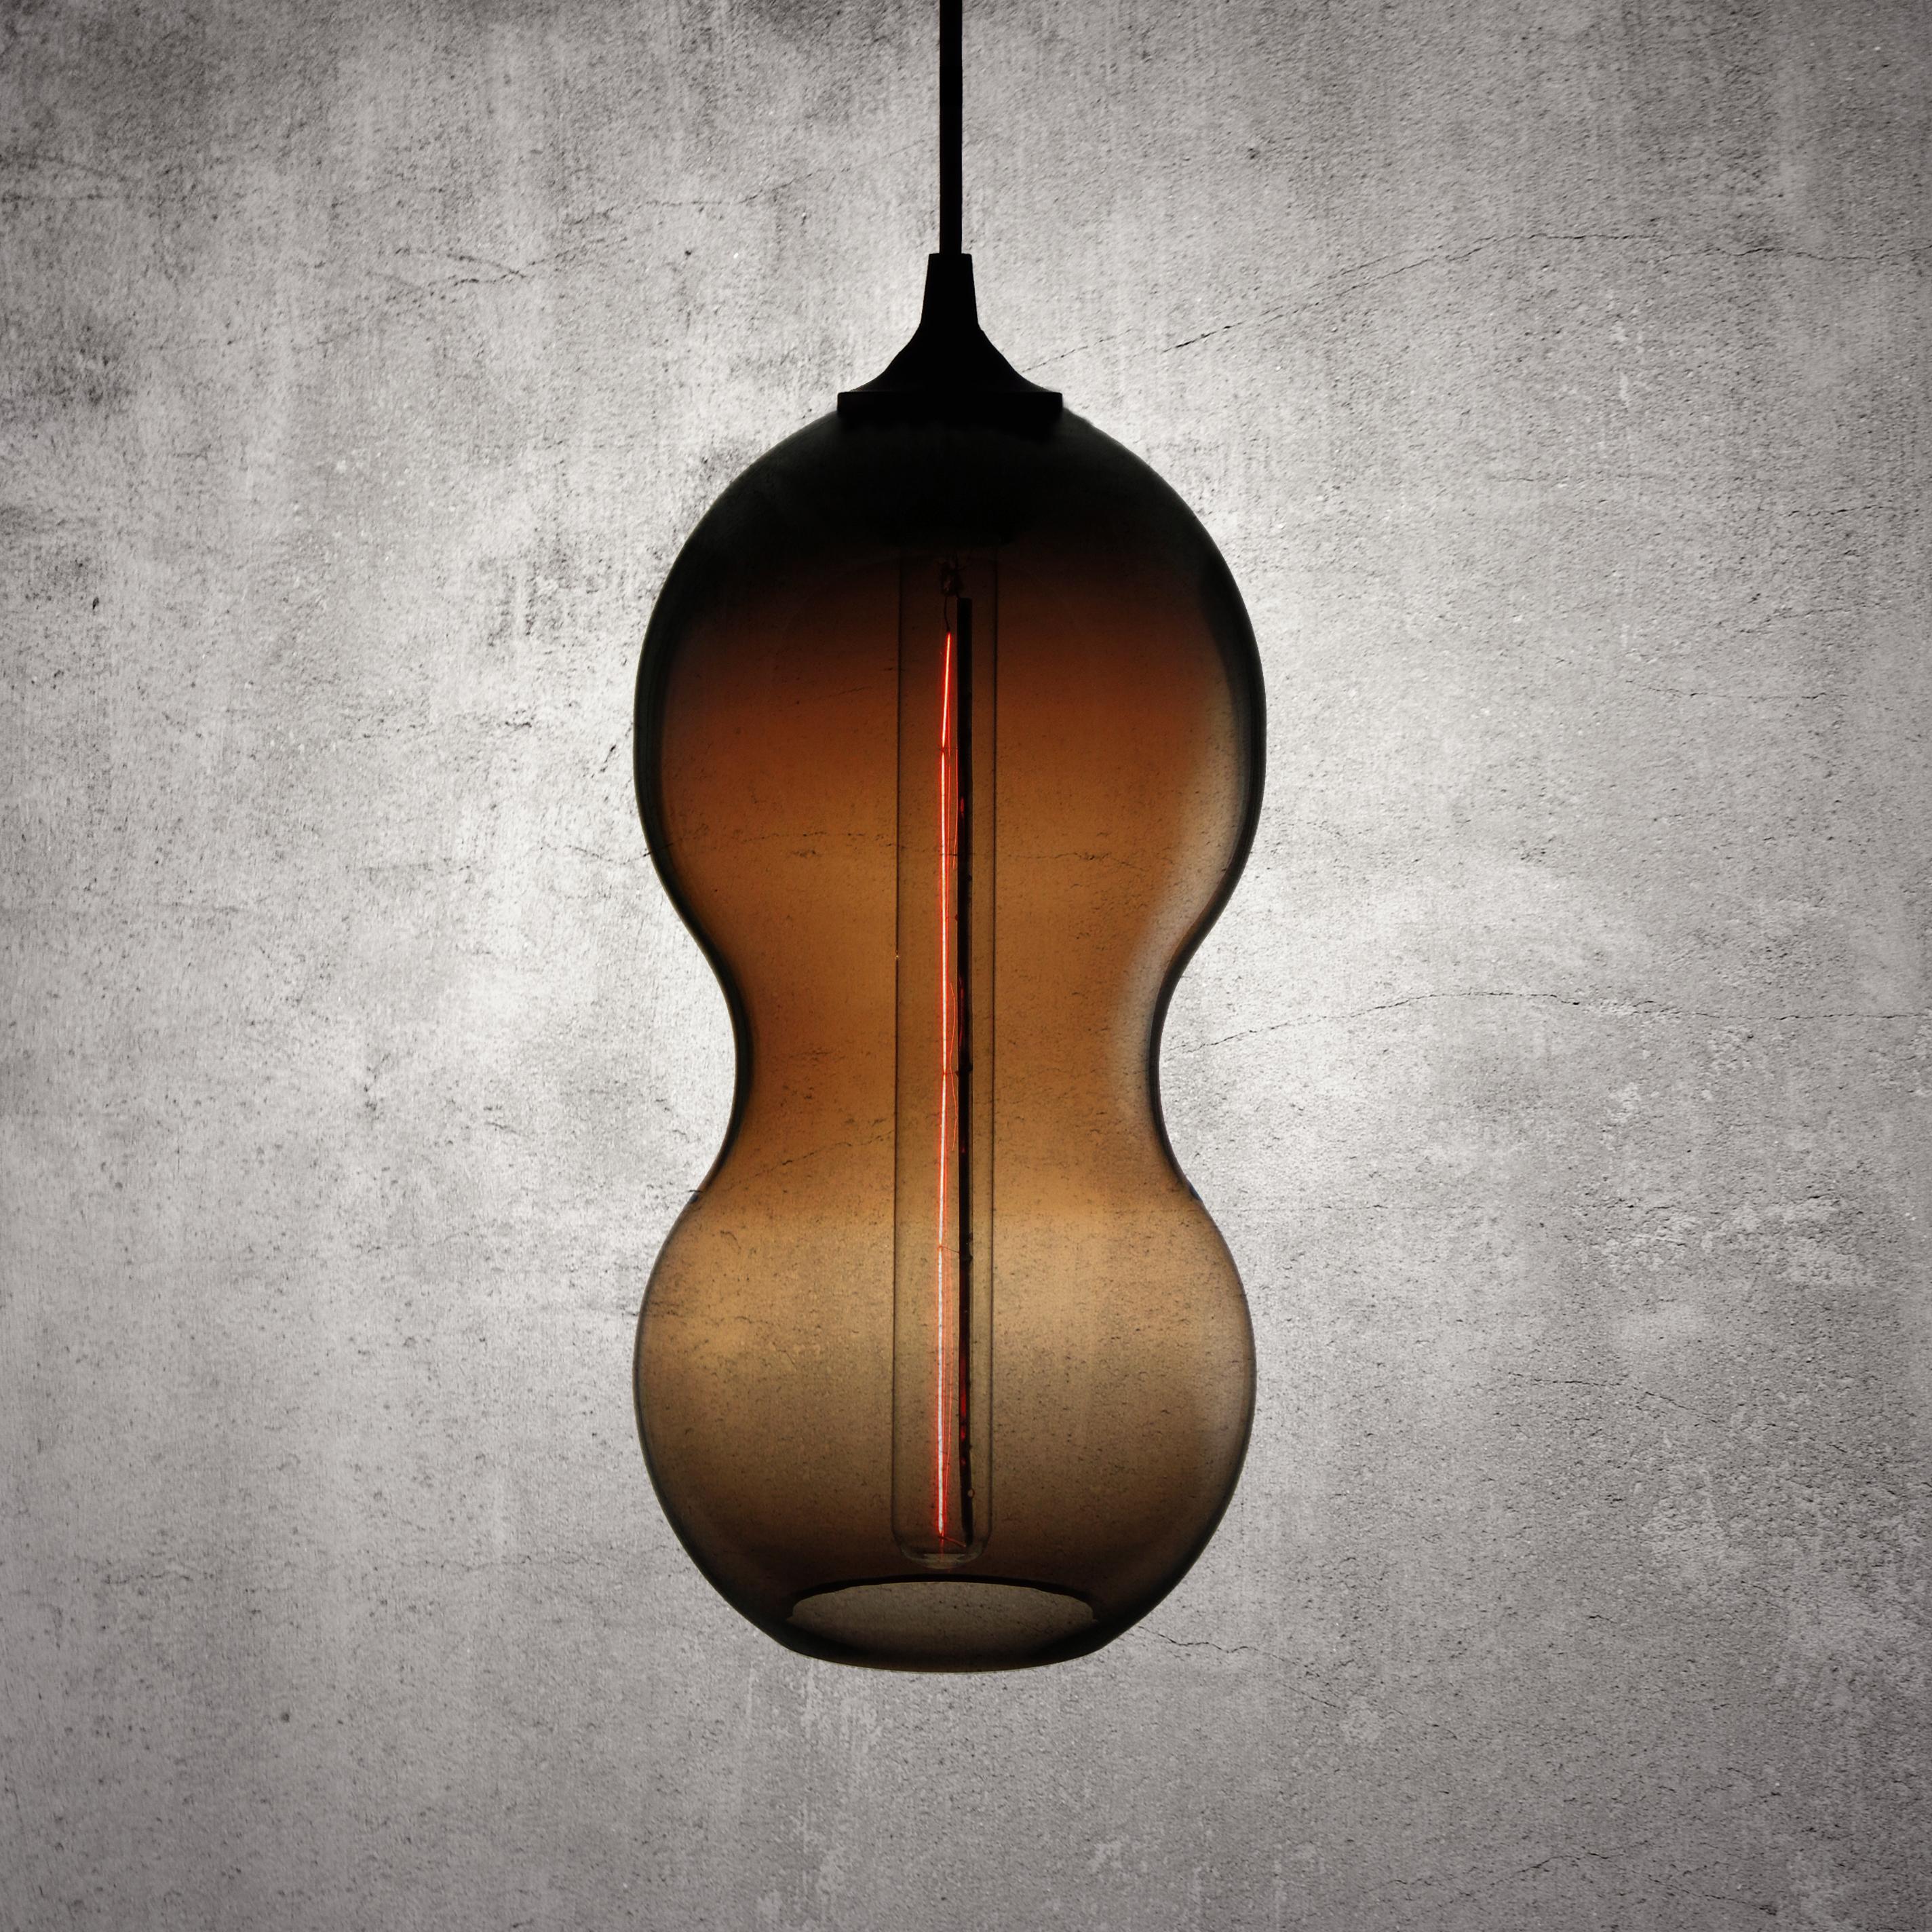 The form of the pod is universal as is the seed, distinctive and familiar - subtle and curvaceous, softly complementing its surrounds. This was exactly our intention when creating the Cacahuate lamp. We wanted a form that complimented rather than